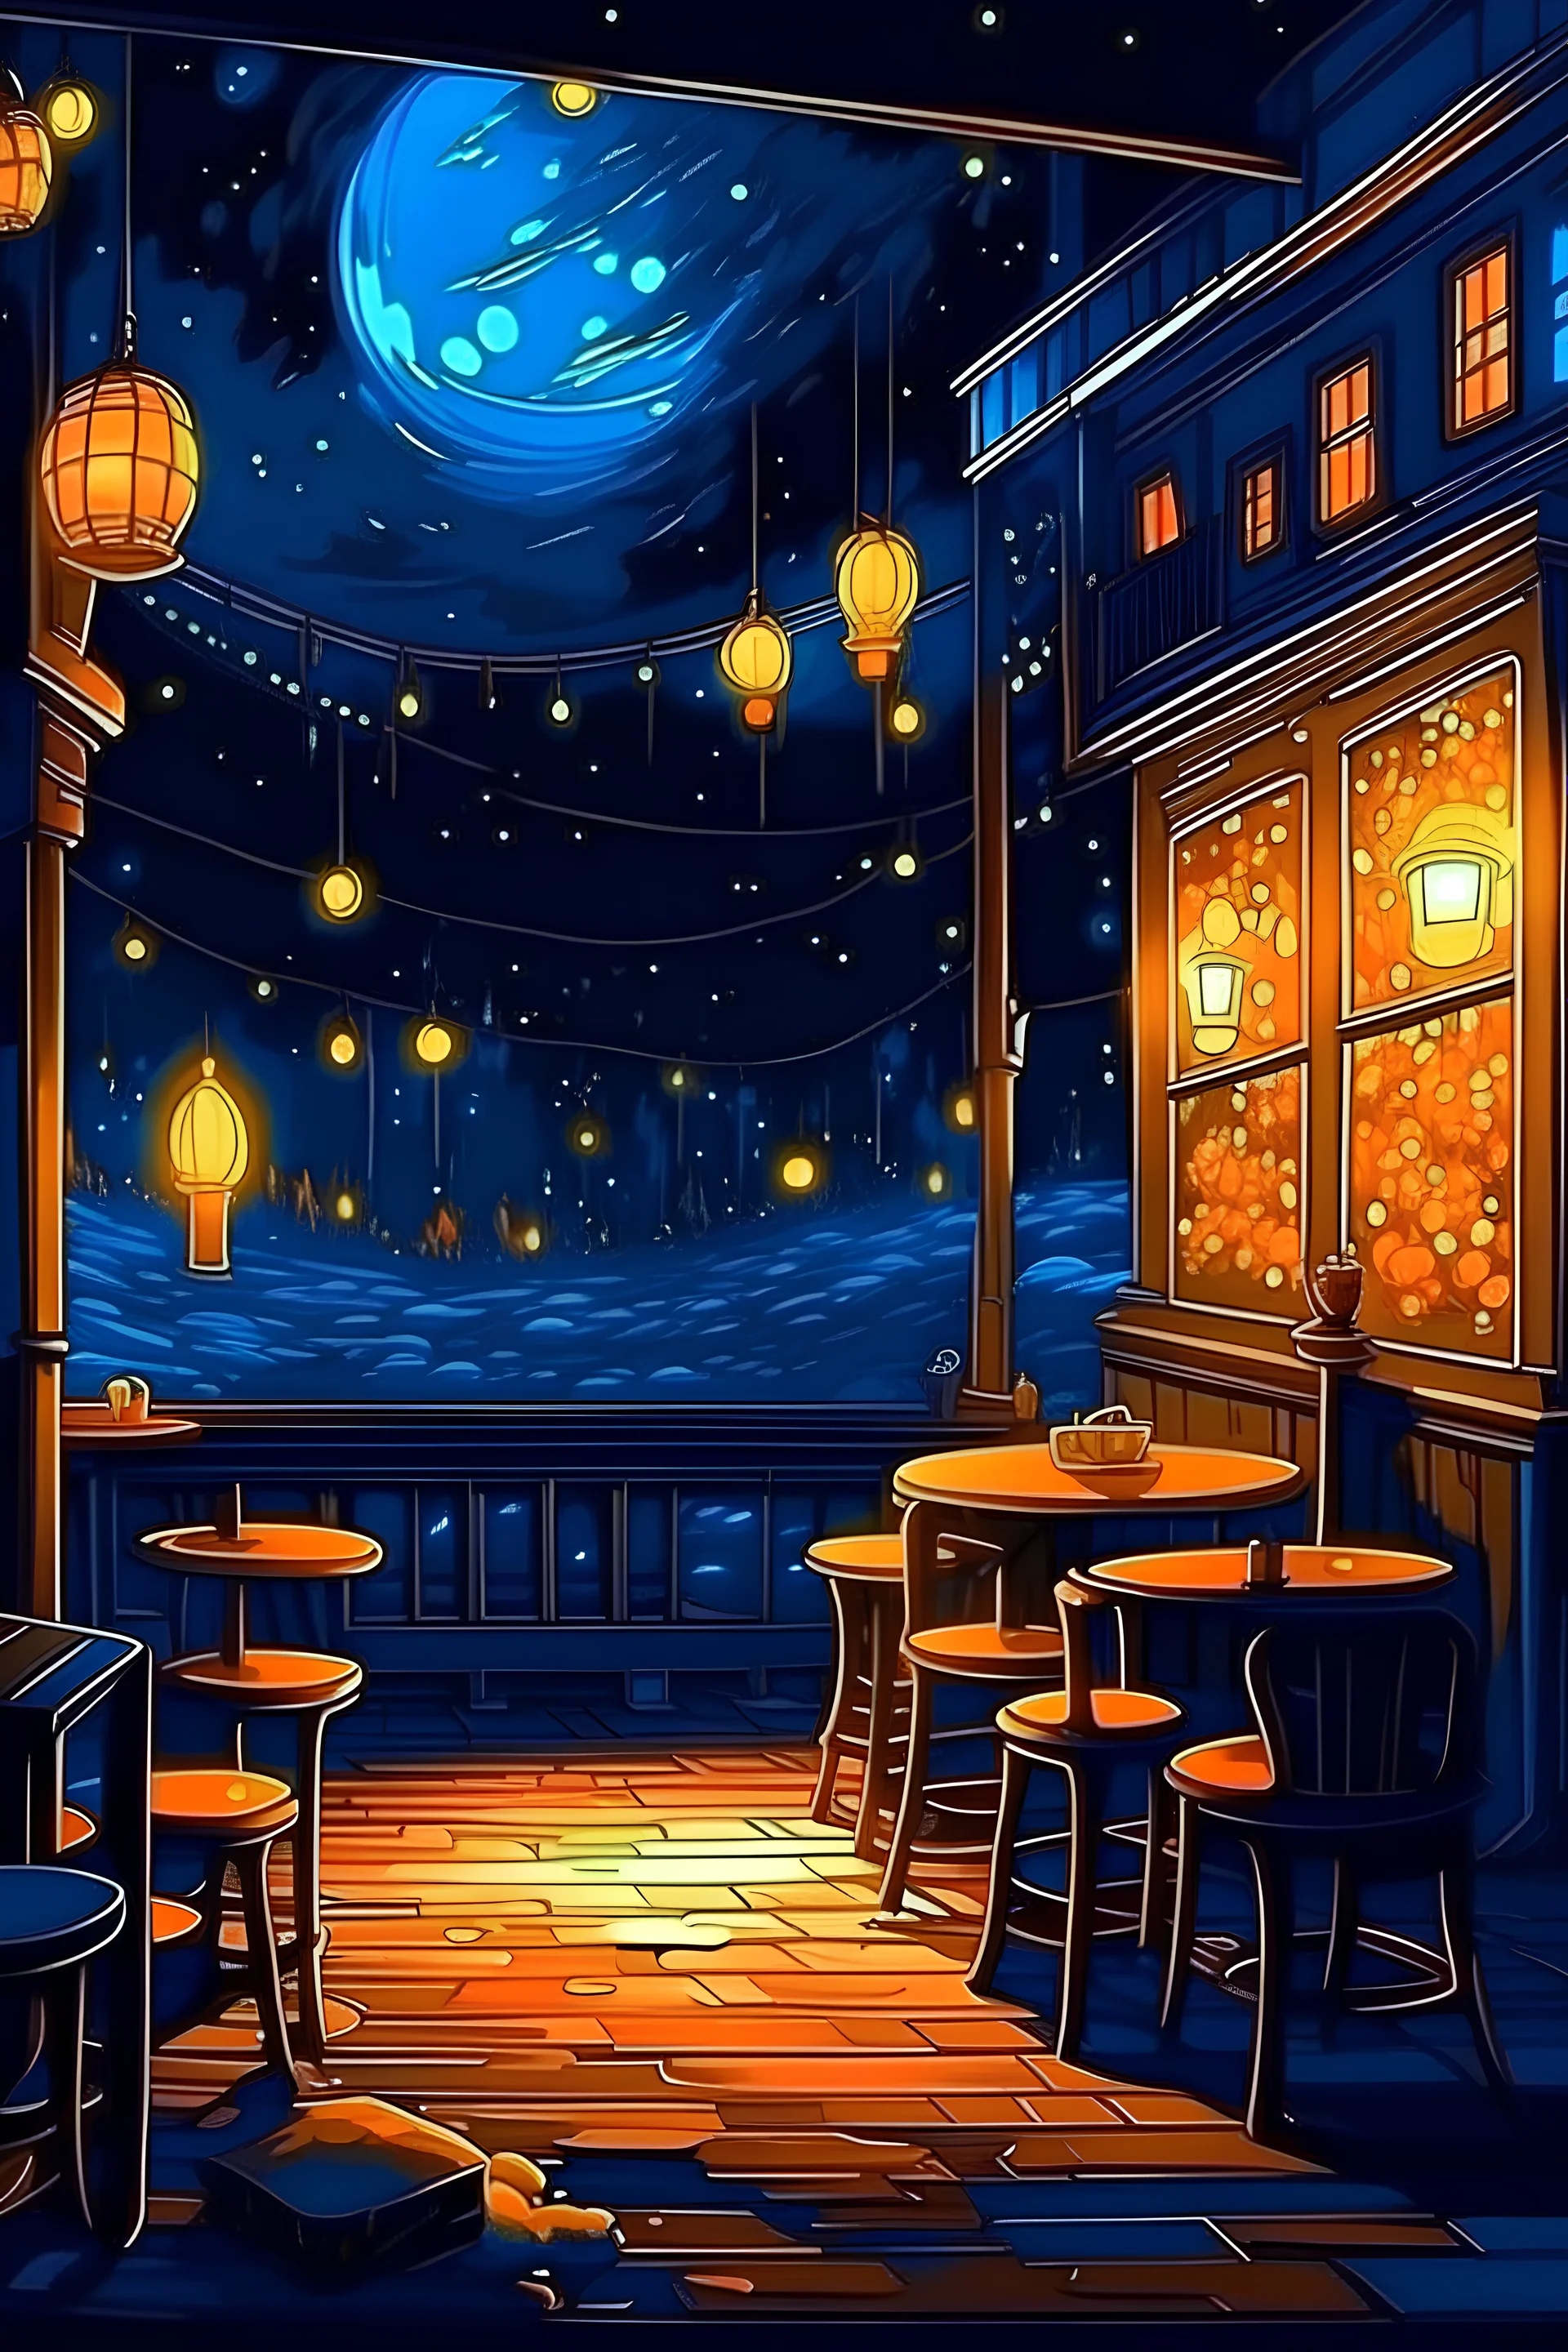 Fire fly in a night cafe pixart